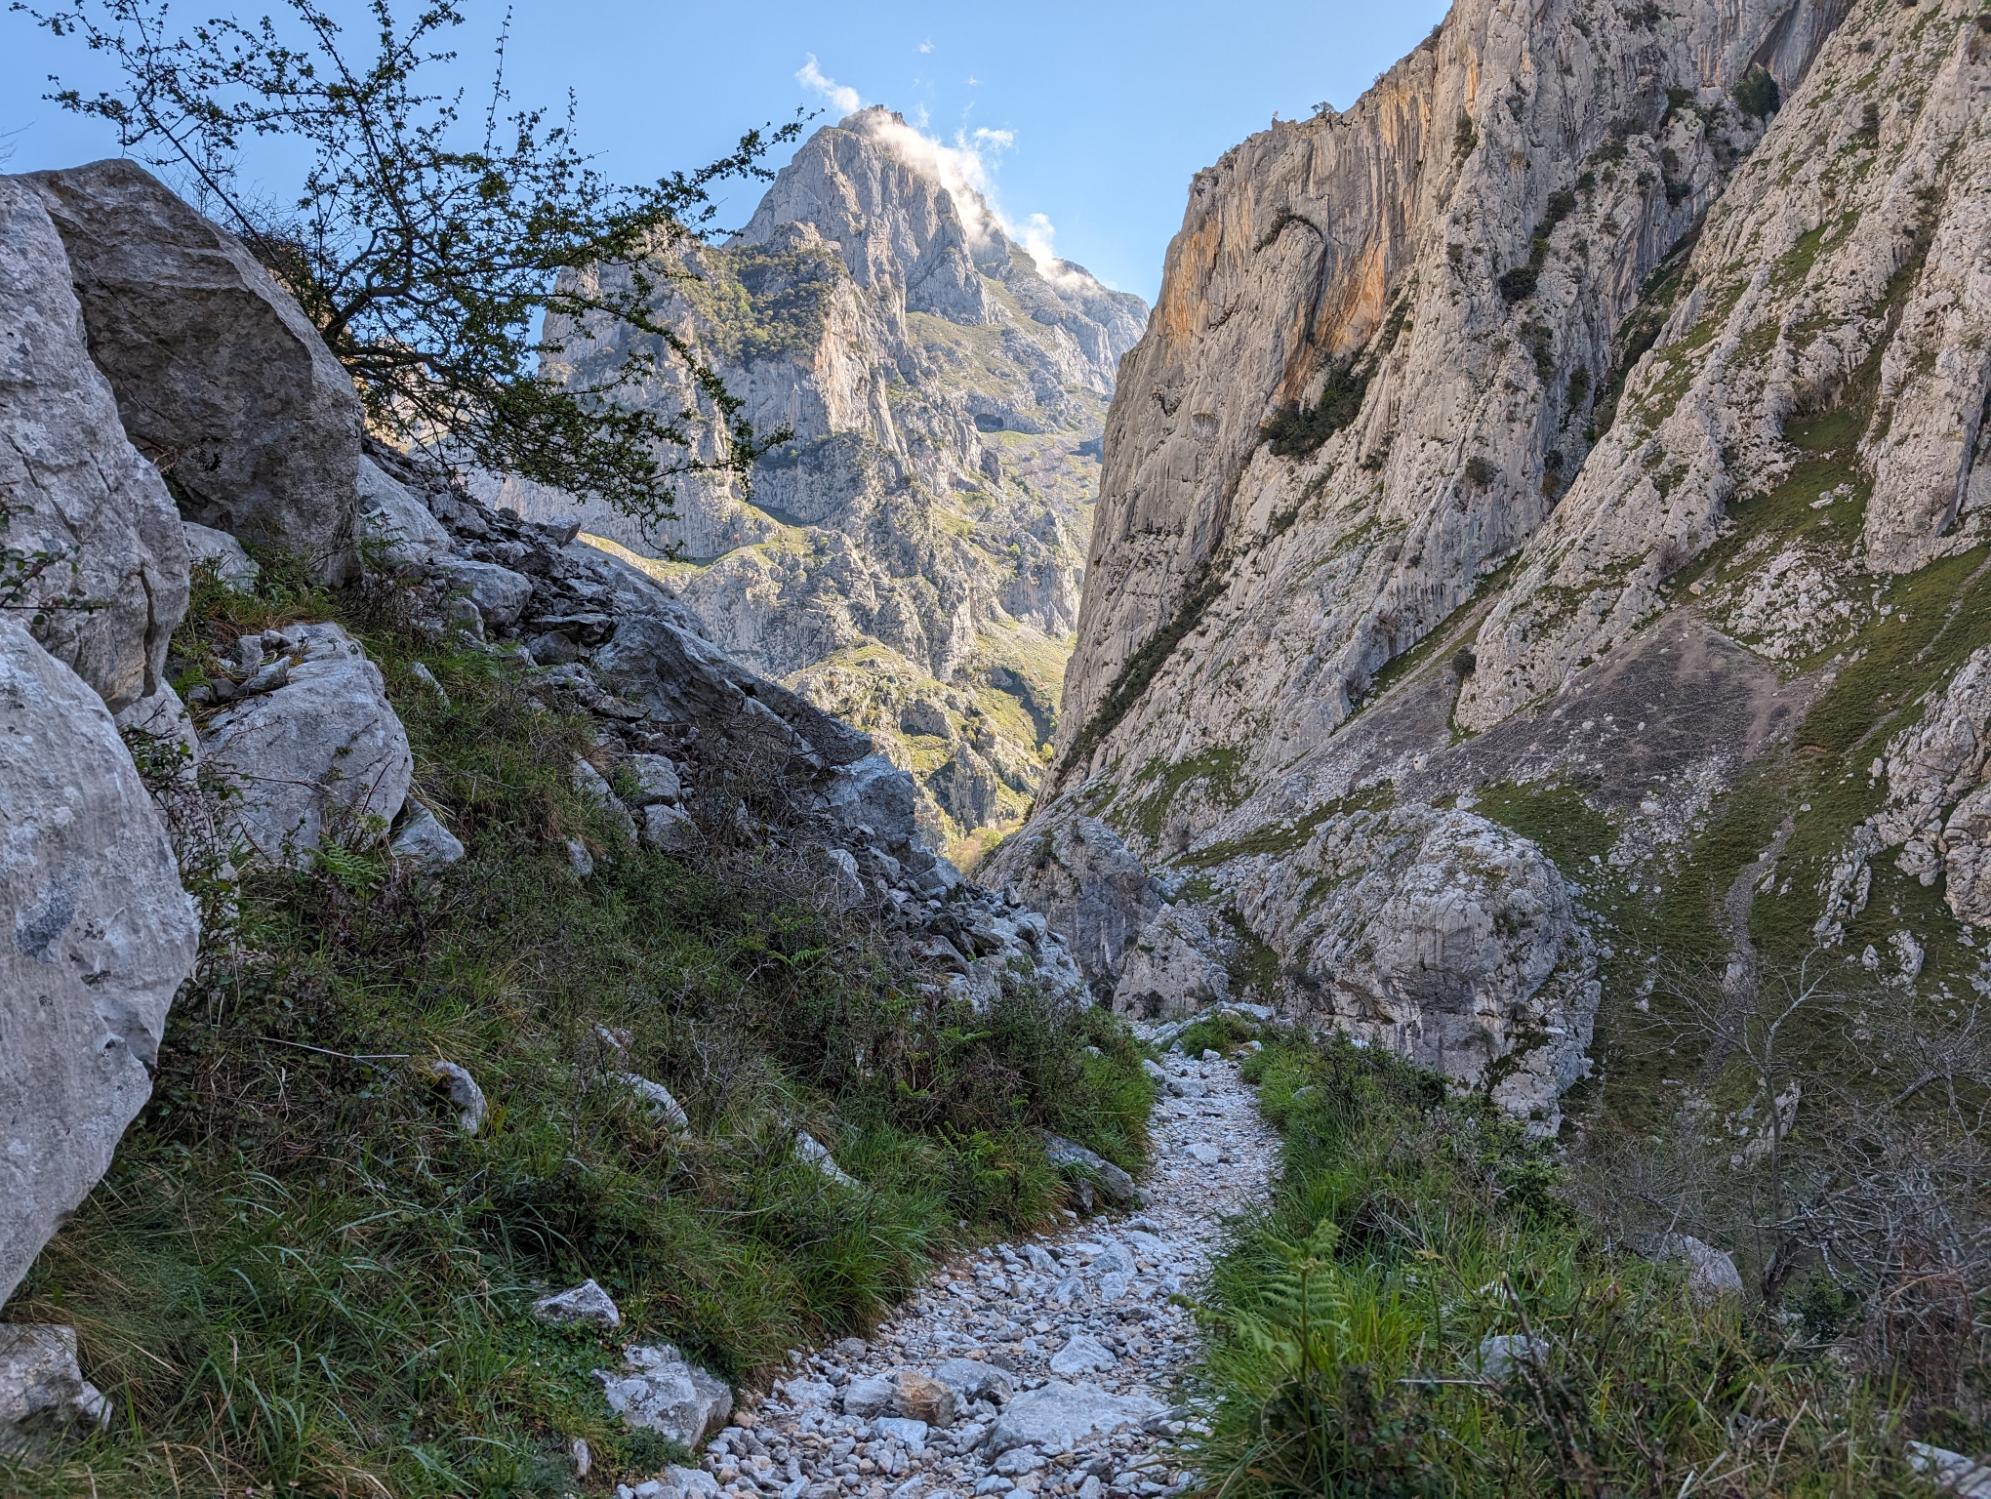 An early view back to Ariscu Sonllanu, which towers over the start of the Ruta del Cares walk. Photo: Stuart Kenny